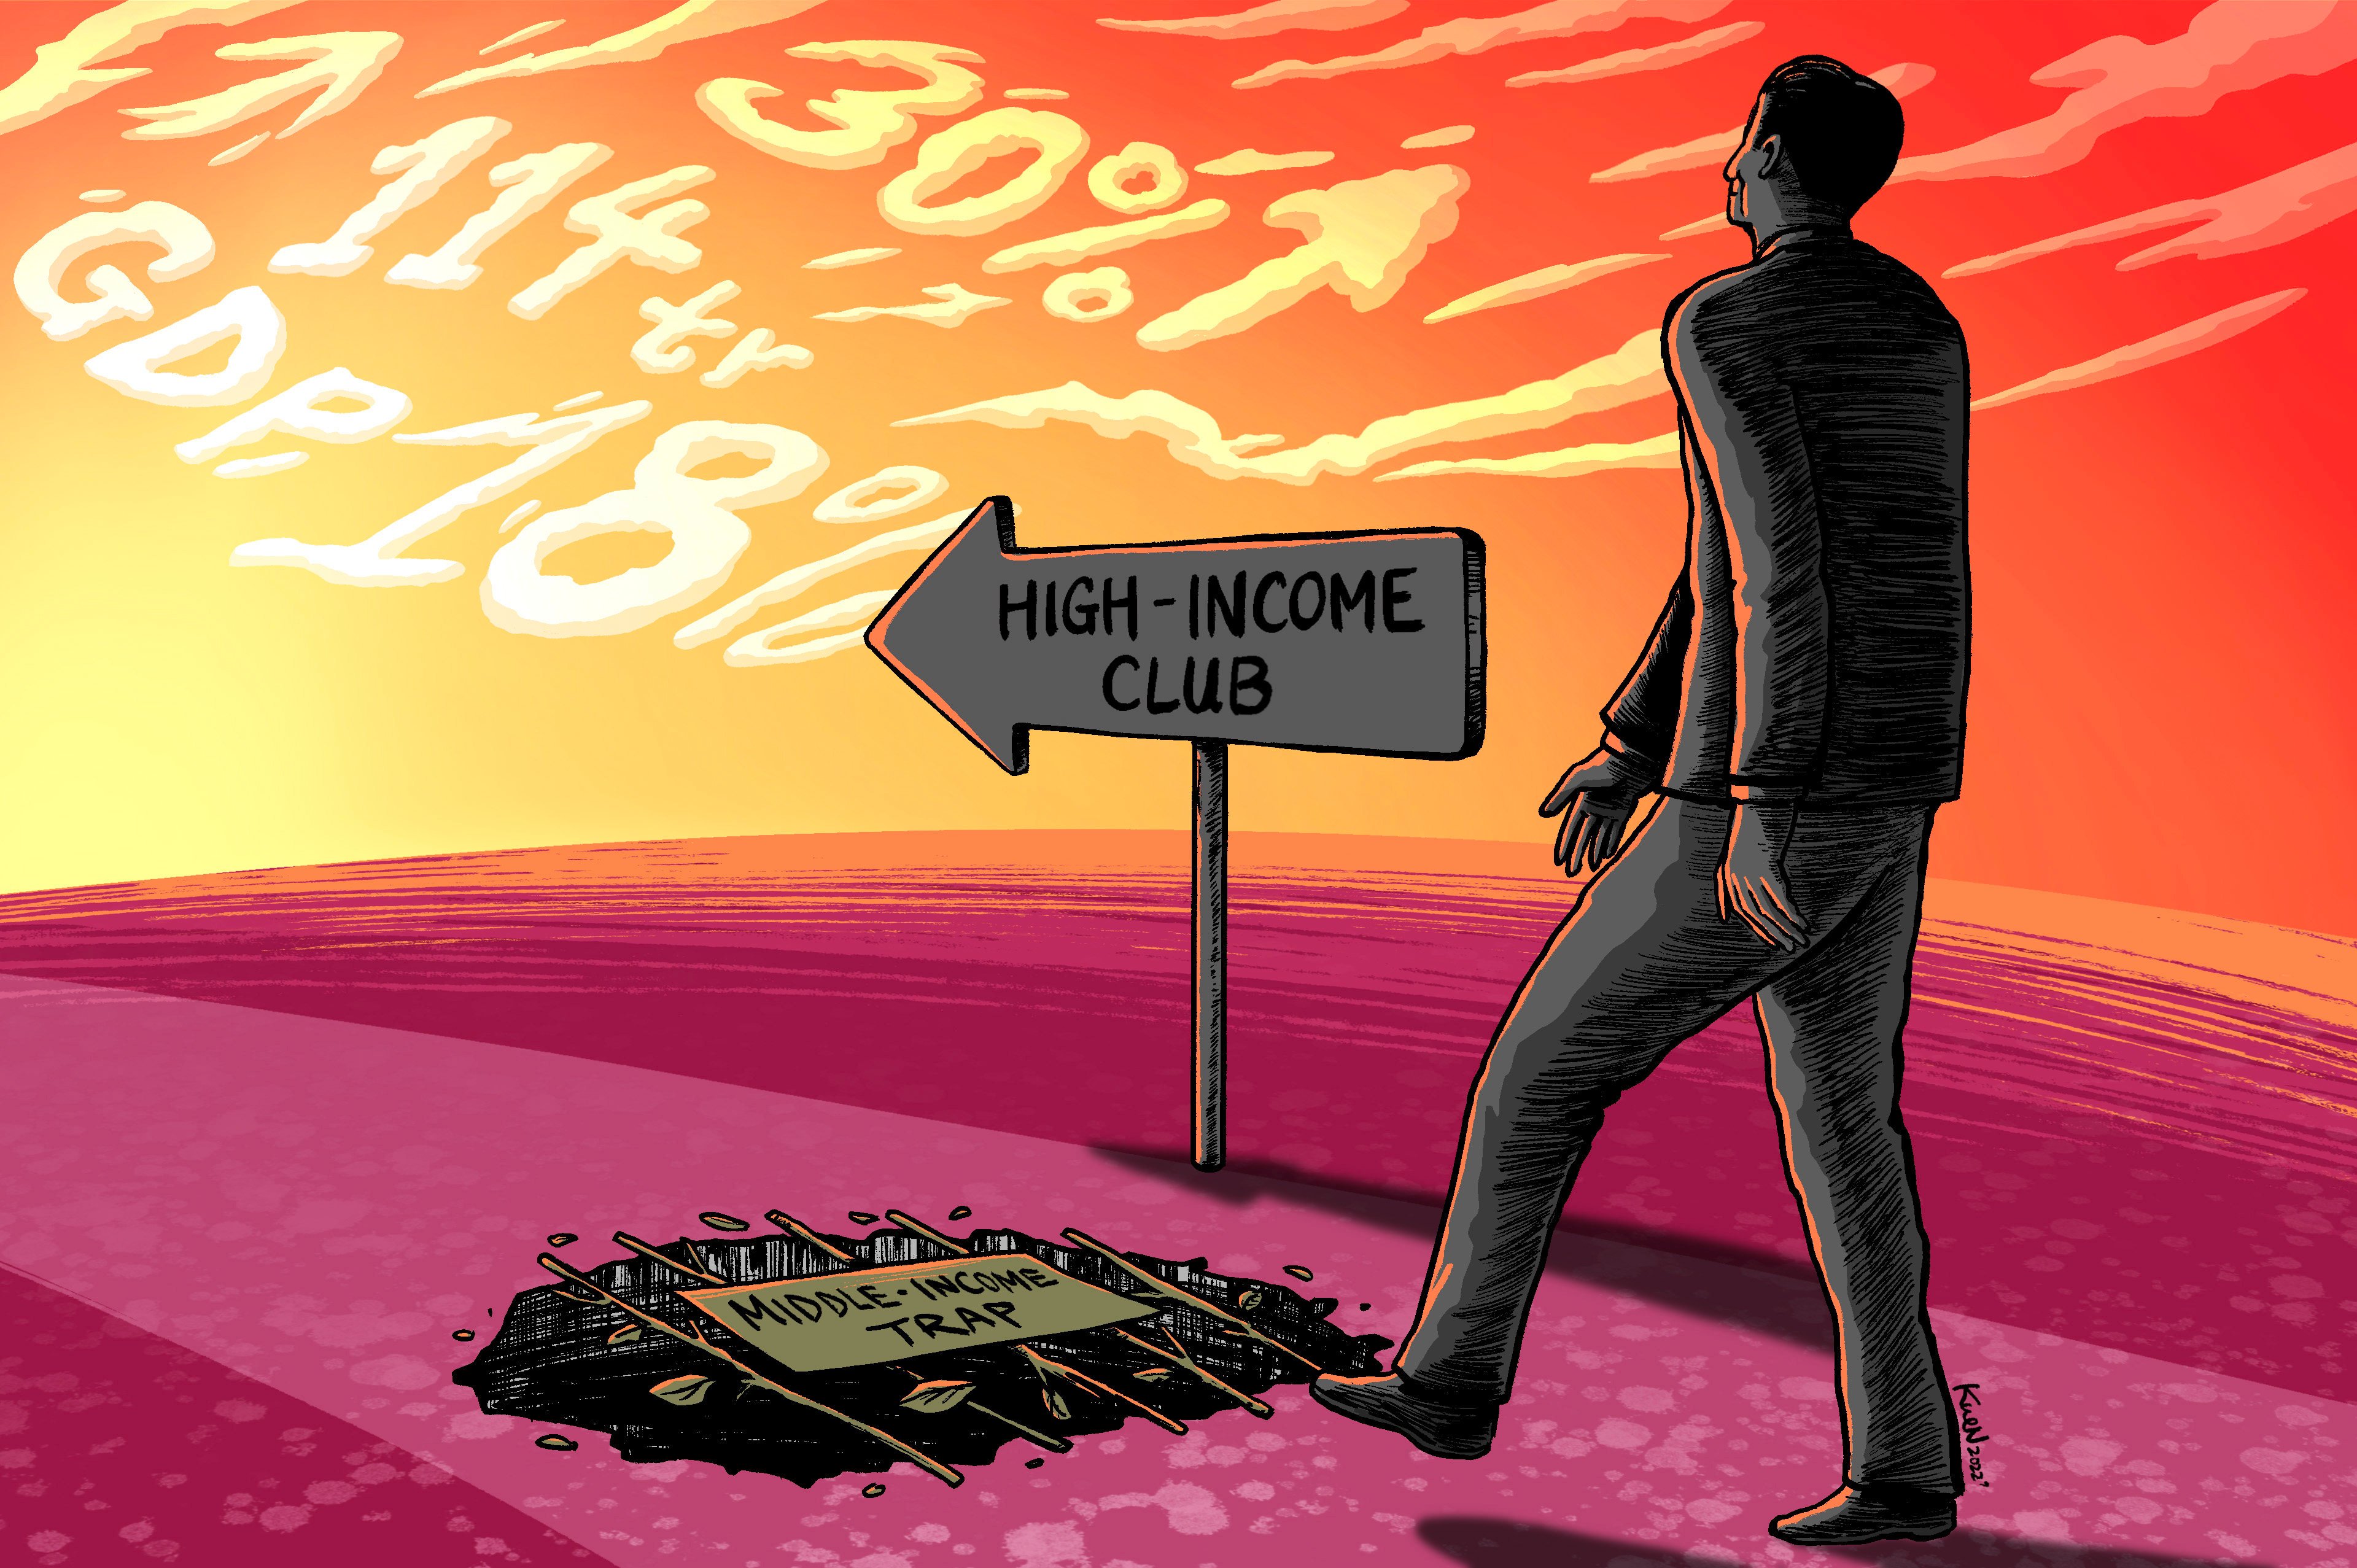 Statistically, China already stands at the doorstep of the high-income club, but there are concerns it could fall victim to the middle-income trap. Photo: Illustration by Lau Ka-kuen